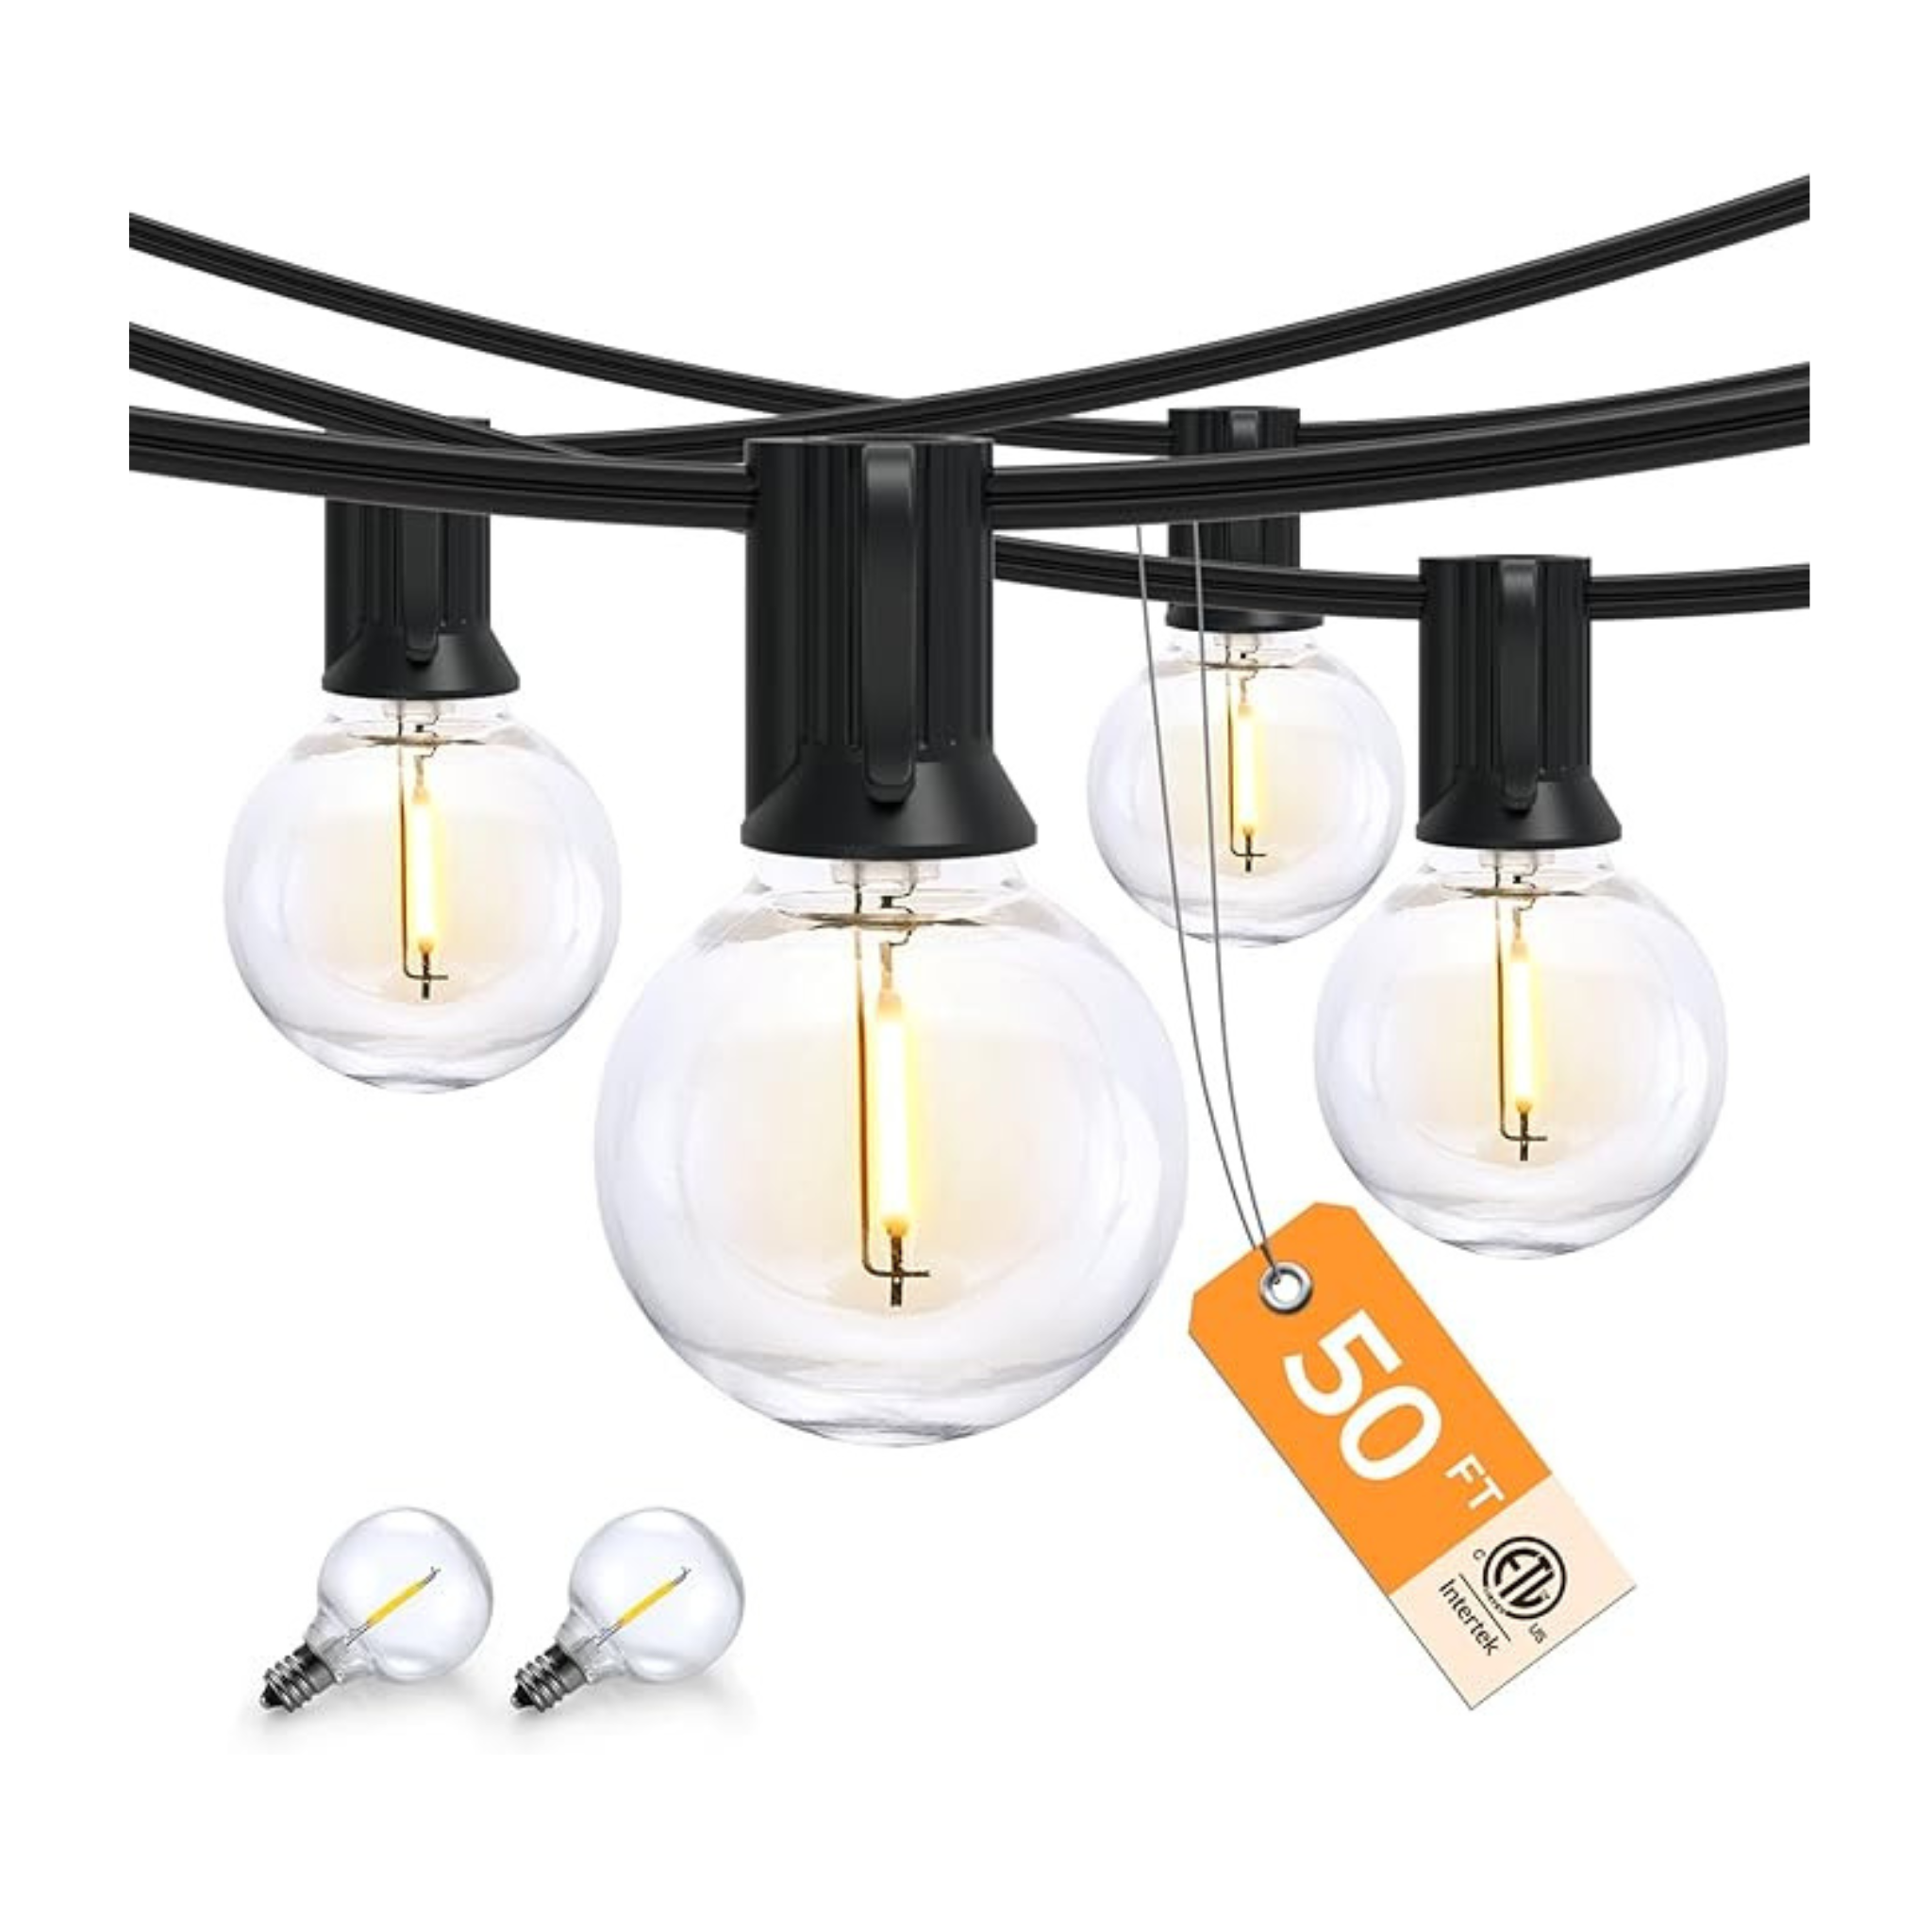 Xmcosy+ 50ft 25-LED Bulbs Waterproof Dimmable Outdoor String Lights